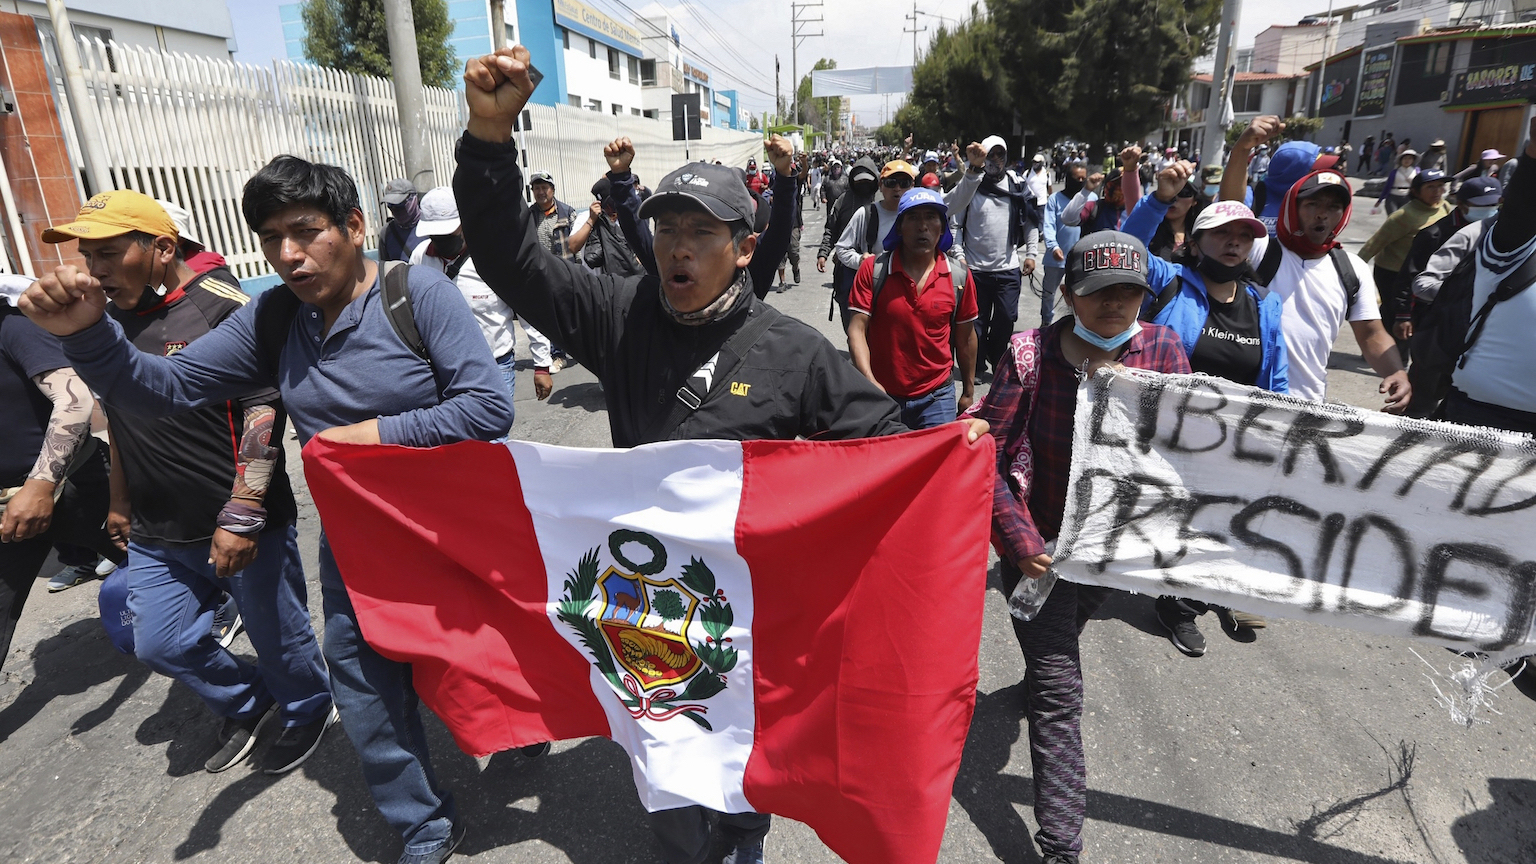 The Anger Behind Peru Protests Won’t Be Resolved Easily